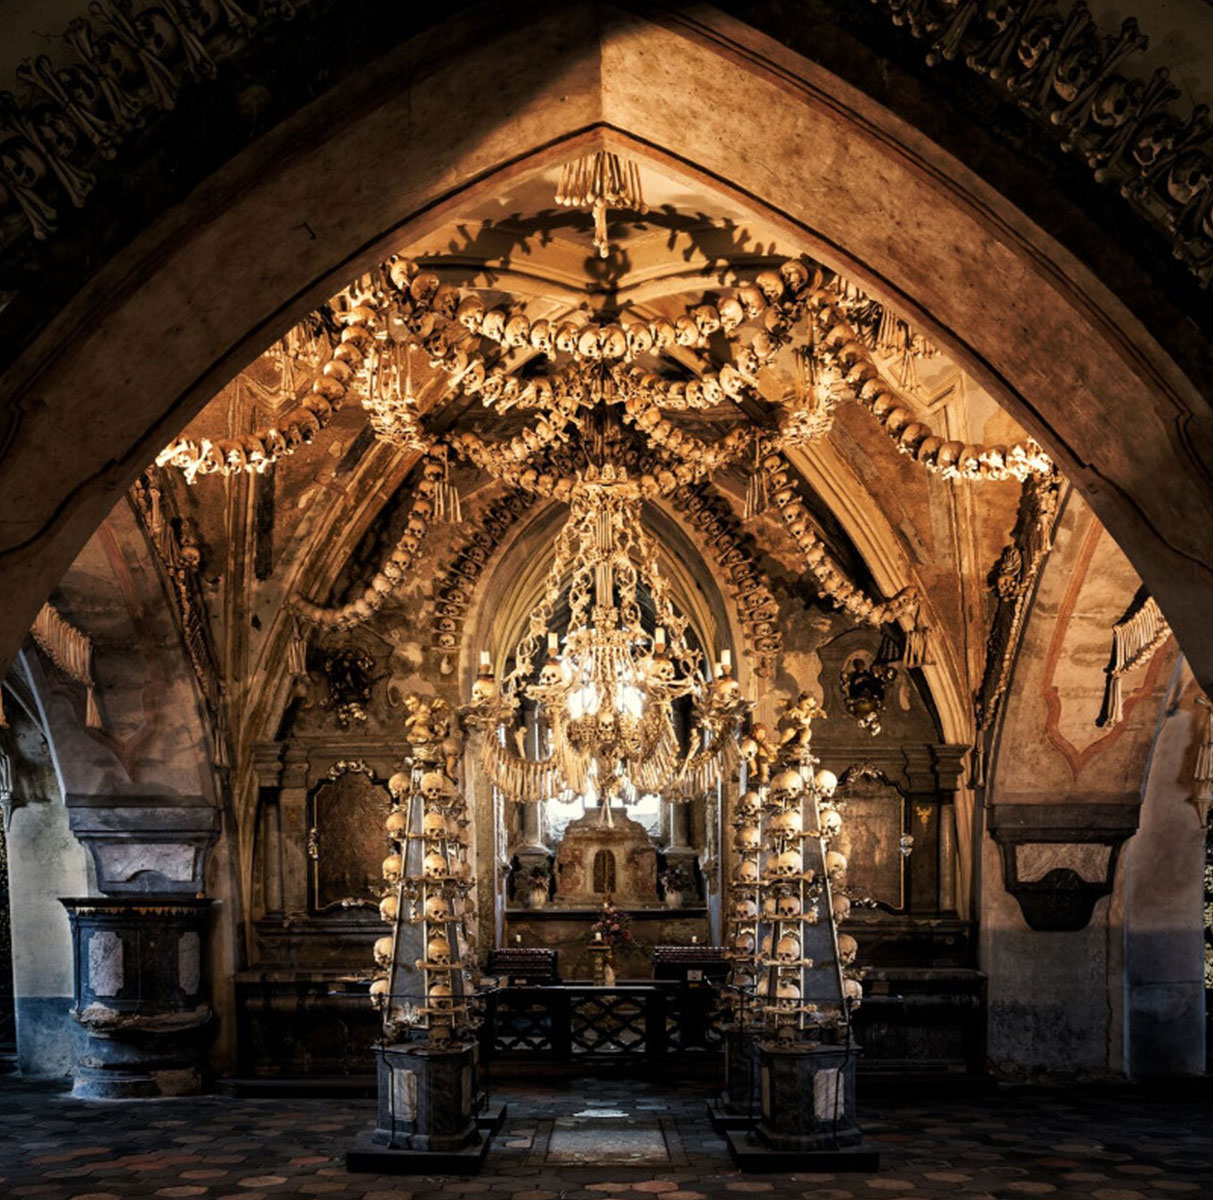 Image Of The Sedlec Ossuary In Kutna Hora, Located An Hour Outside Prague, Czech Republic